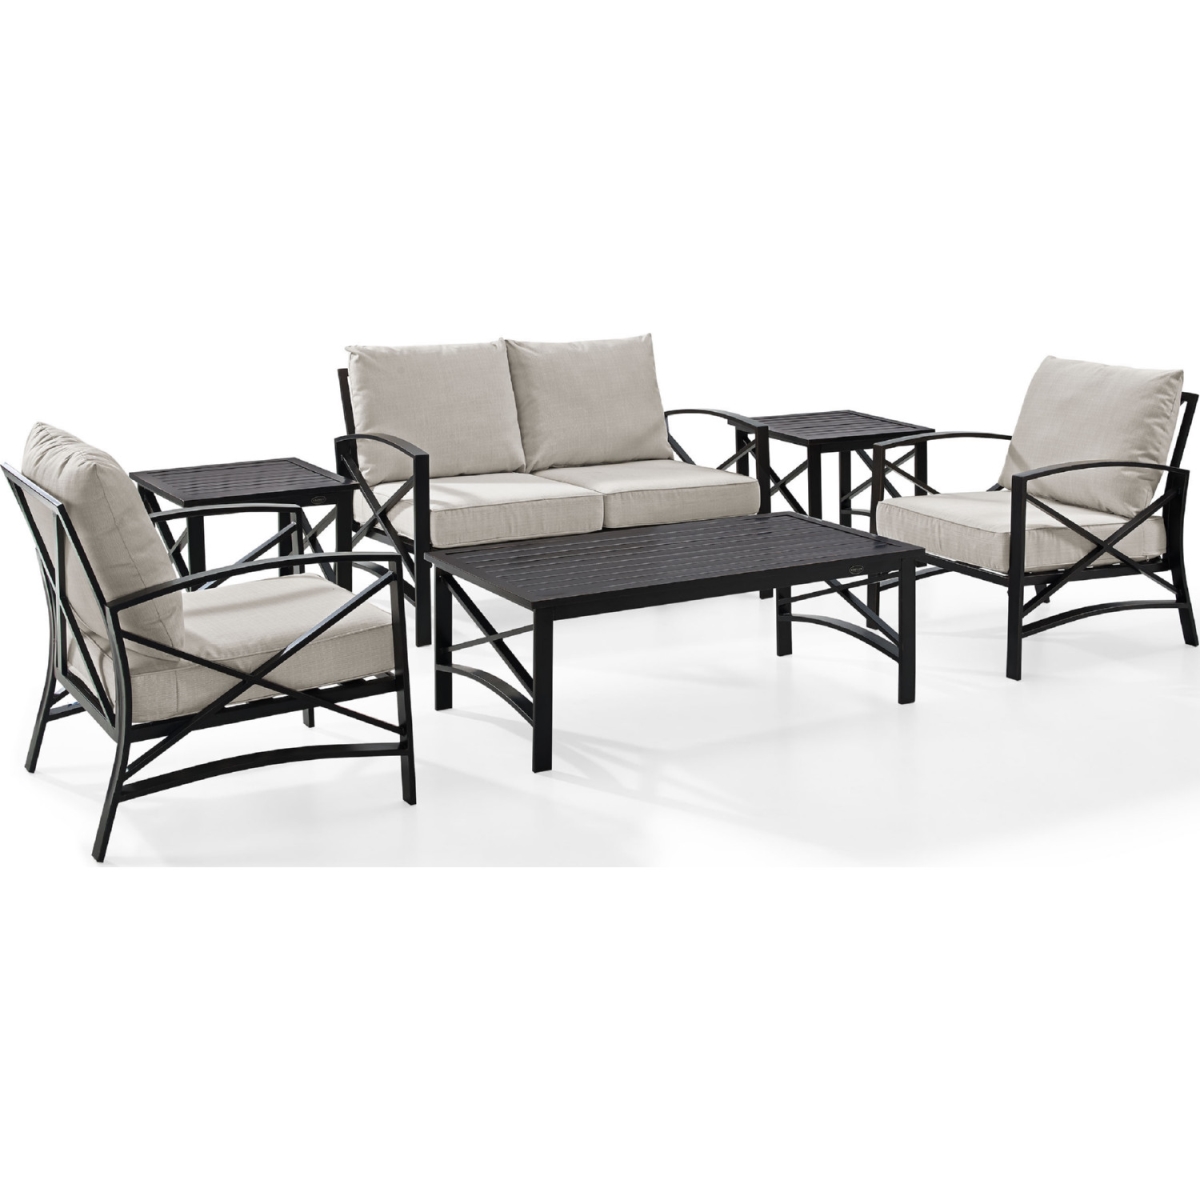 Ko60017bz-ol 6 Piece Kaplan Outdoor Seating Set With Oatmeal Cushion - Loveseat, Two Chairs, Two Side Tables, Coffee Table